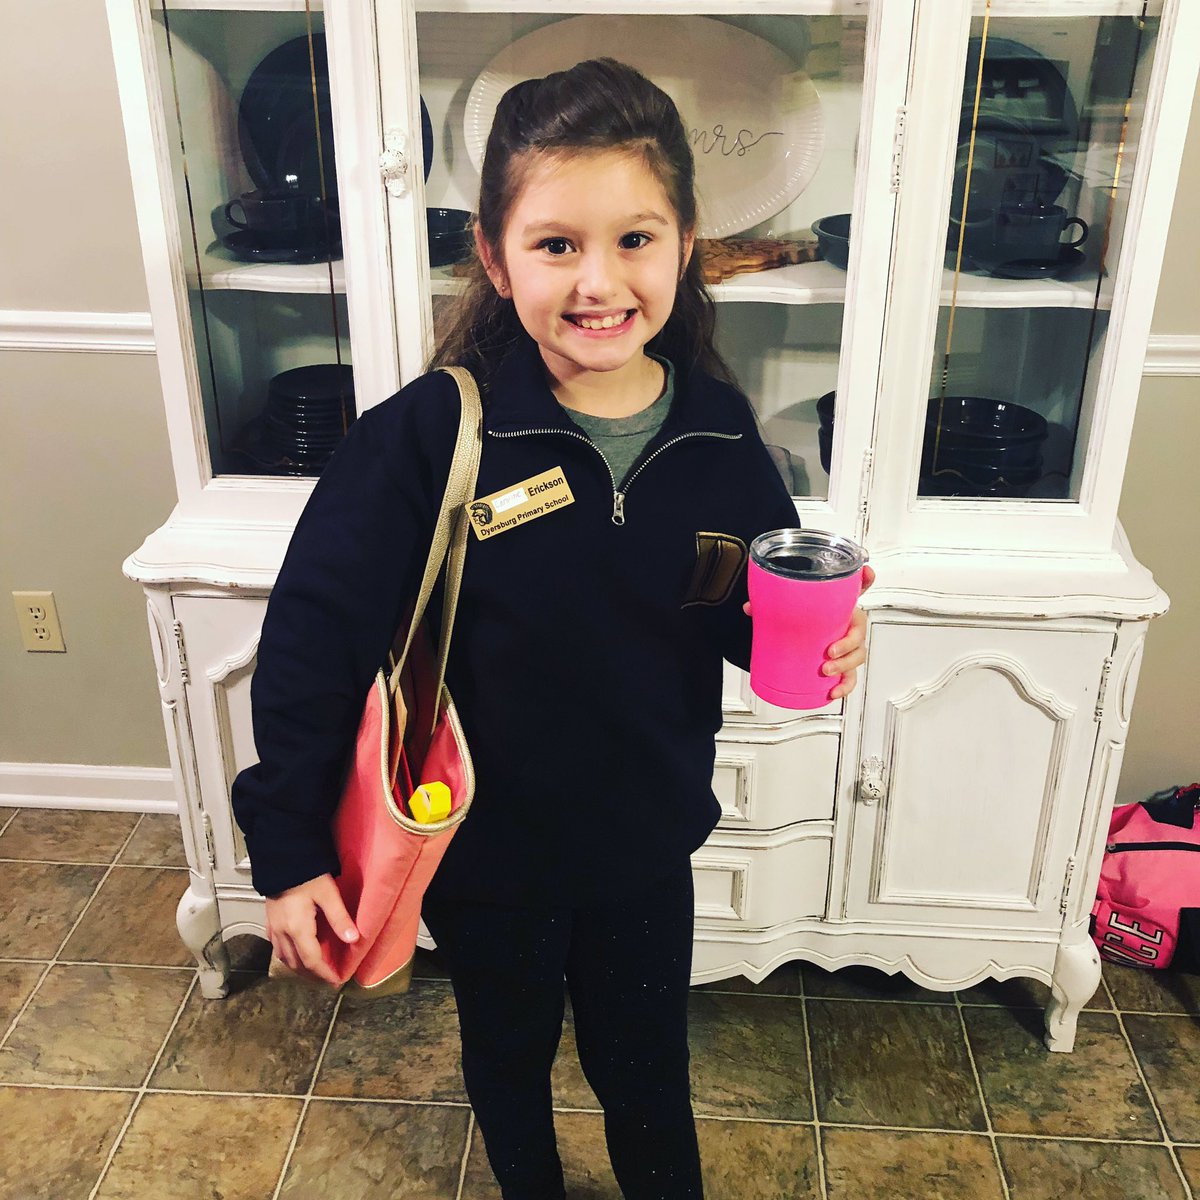 Superhero/Everyday hero dress up day at school for Caroline, our granddaughter. Her Mom is a Kindergarten teacher.  Today, so is she!  #Momismyhero